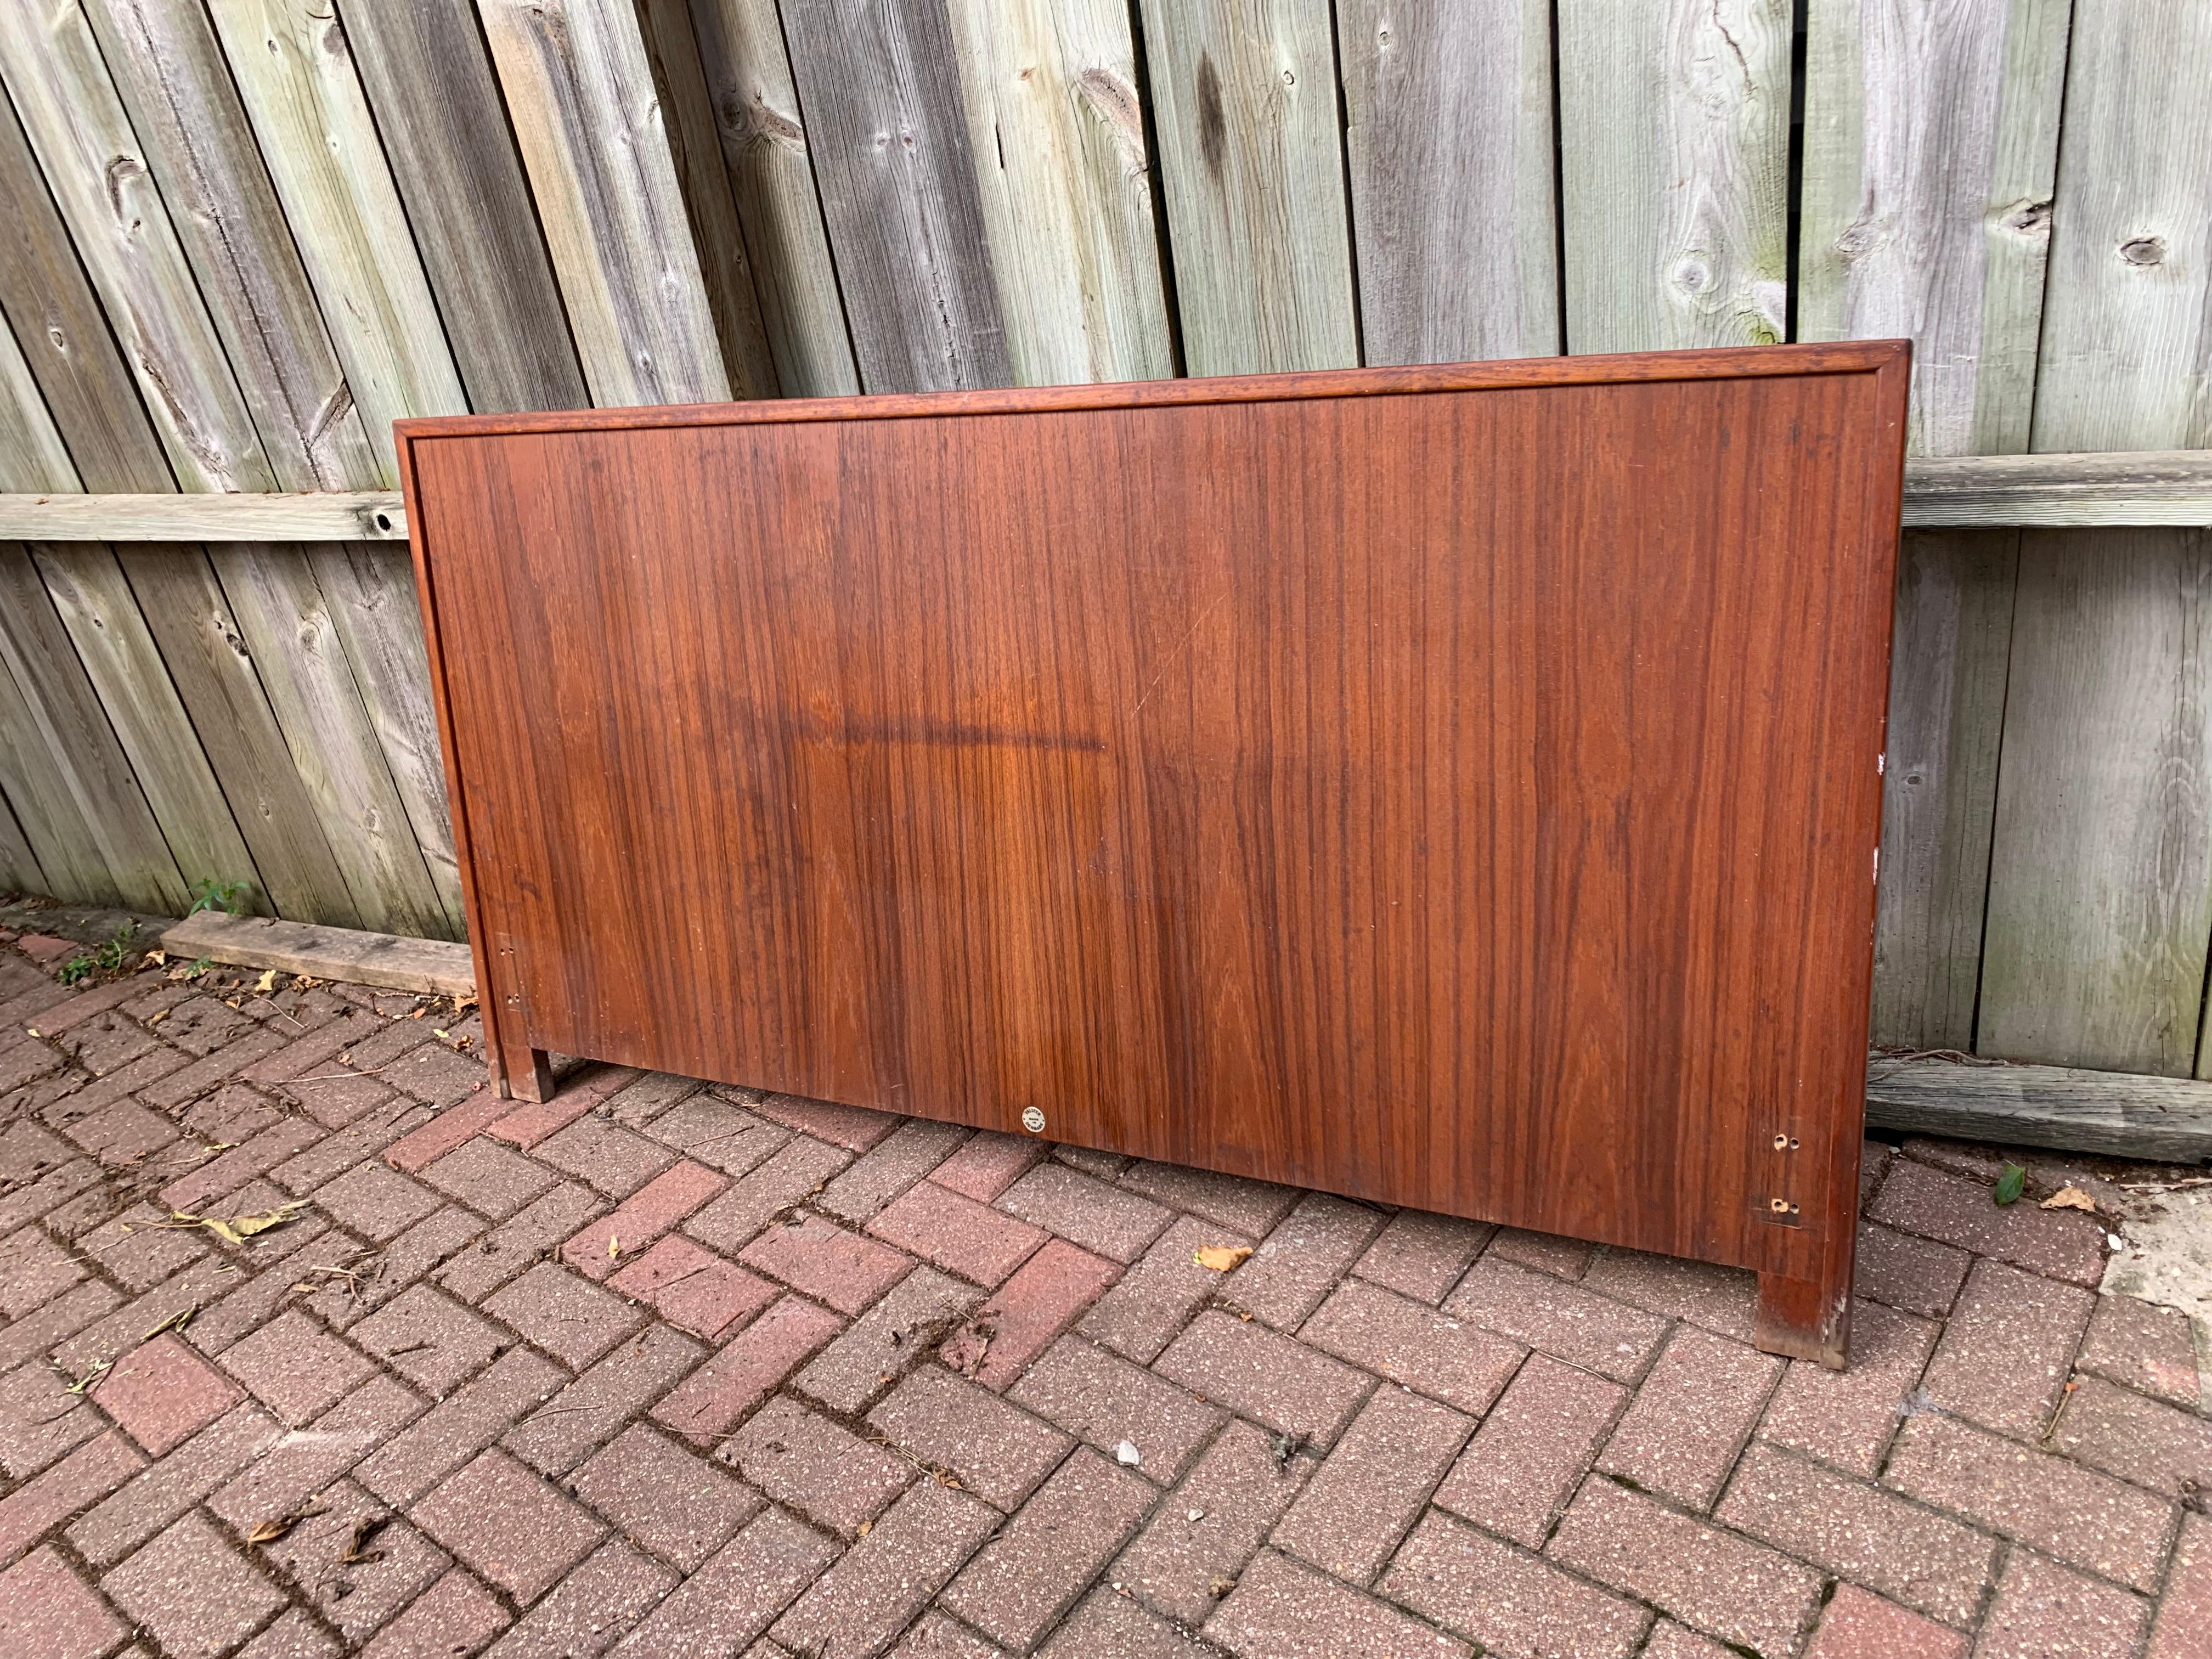 Dramatic placement of the teak grain defines the beauty of this simple but impressive Danish Modern headboard. The wood is unadorned allowing the grain to shine, 
iconic midcentury styling 
part of a set including gentleman's cabinet, dresser and